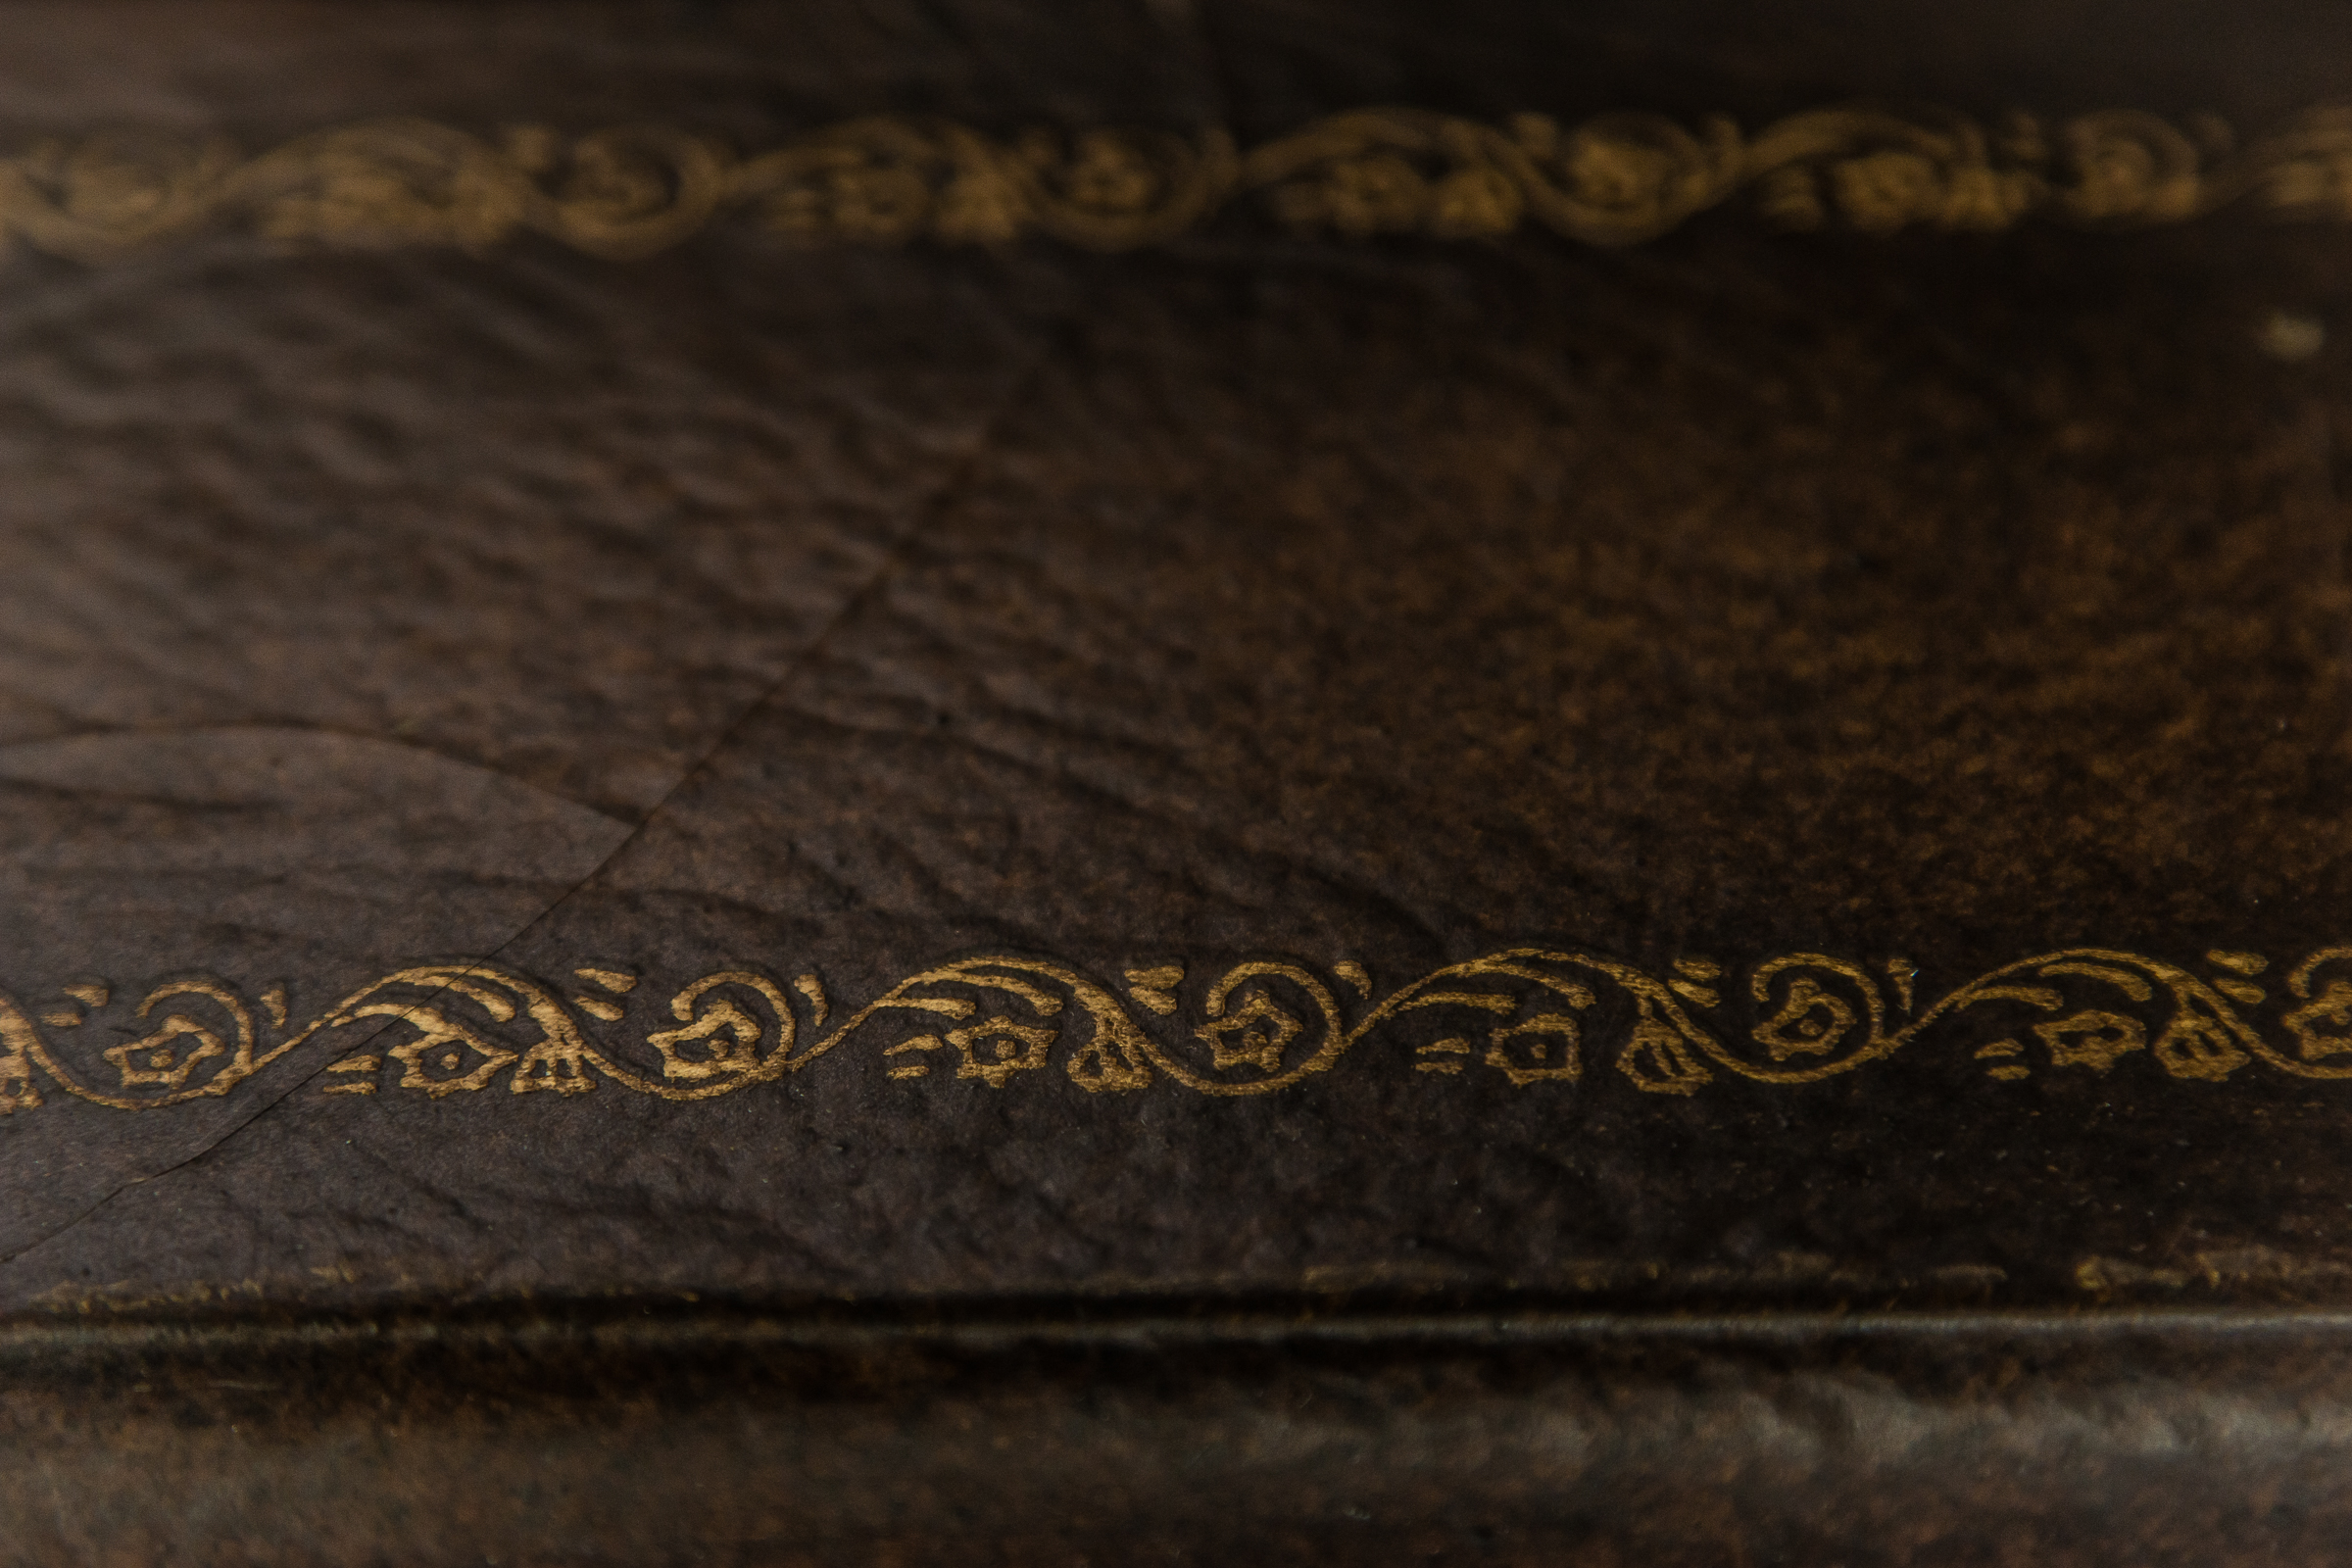 A photo of leather binding